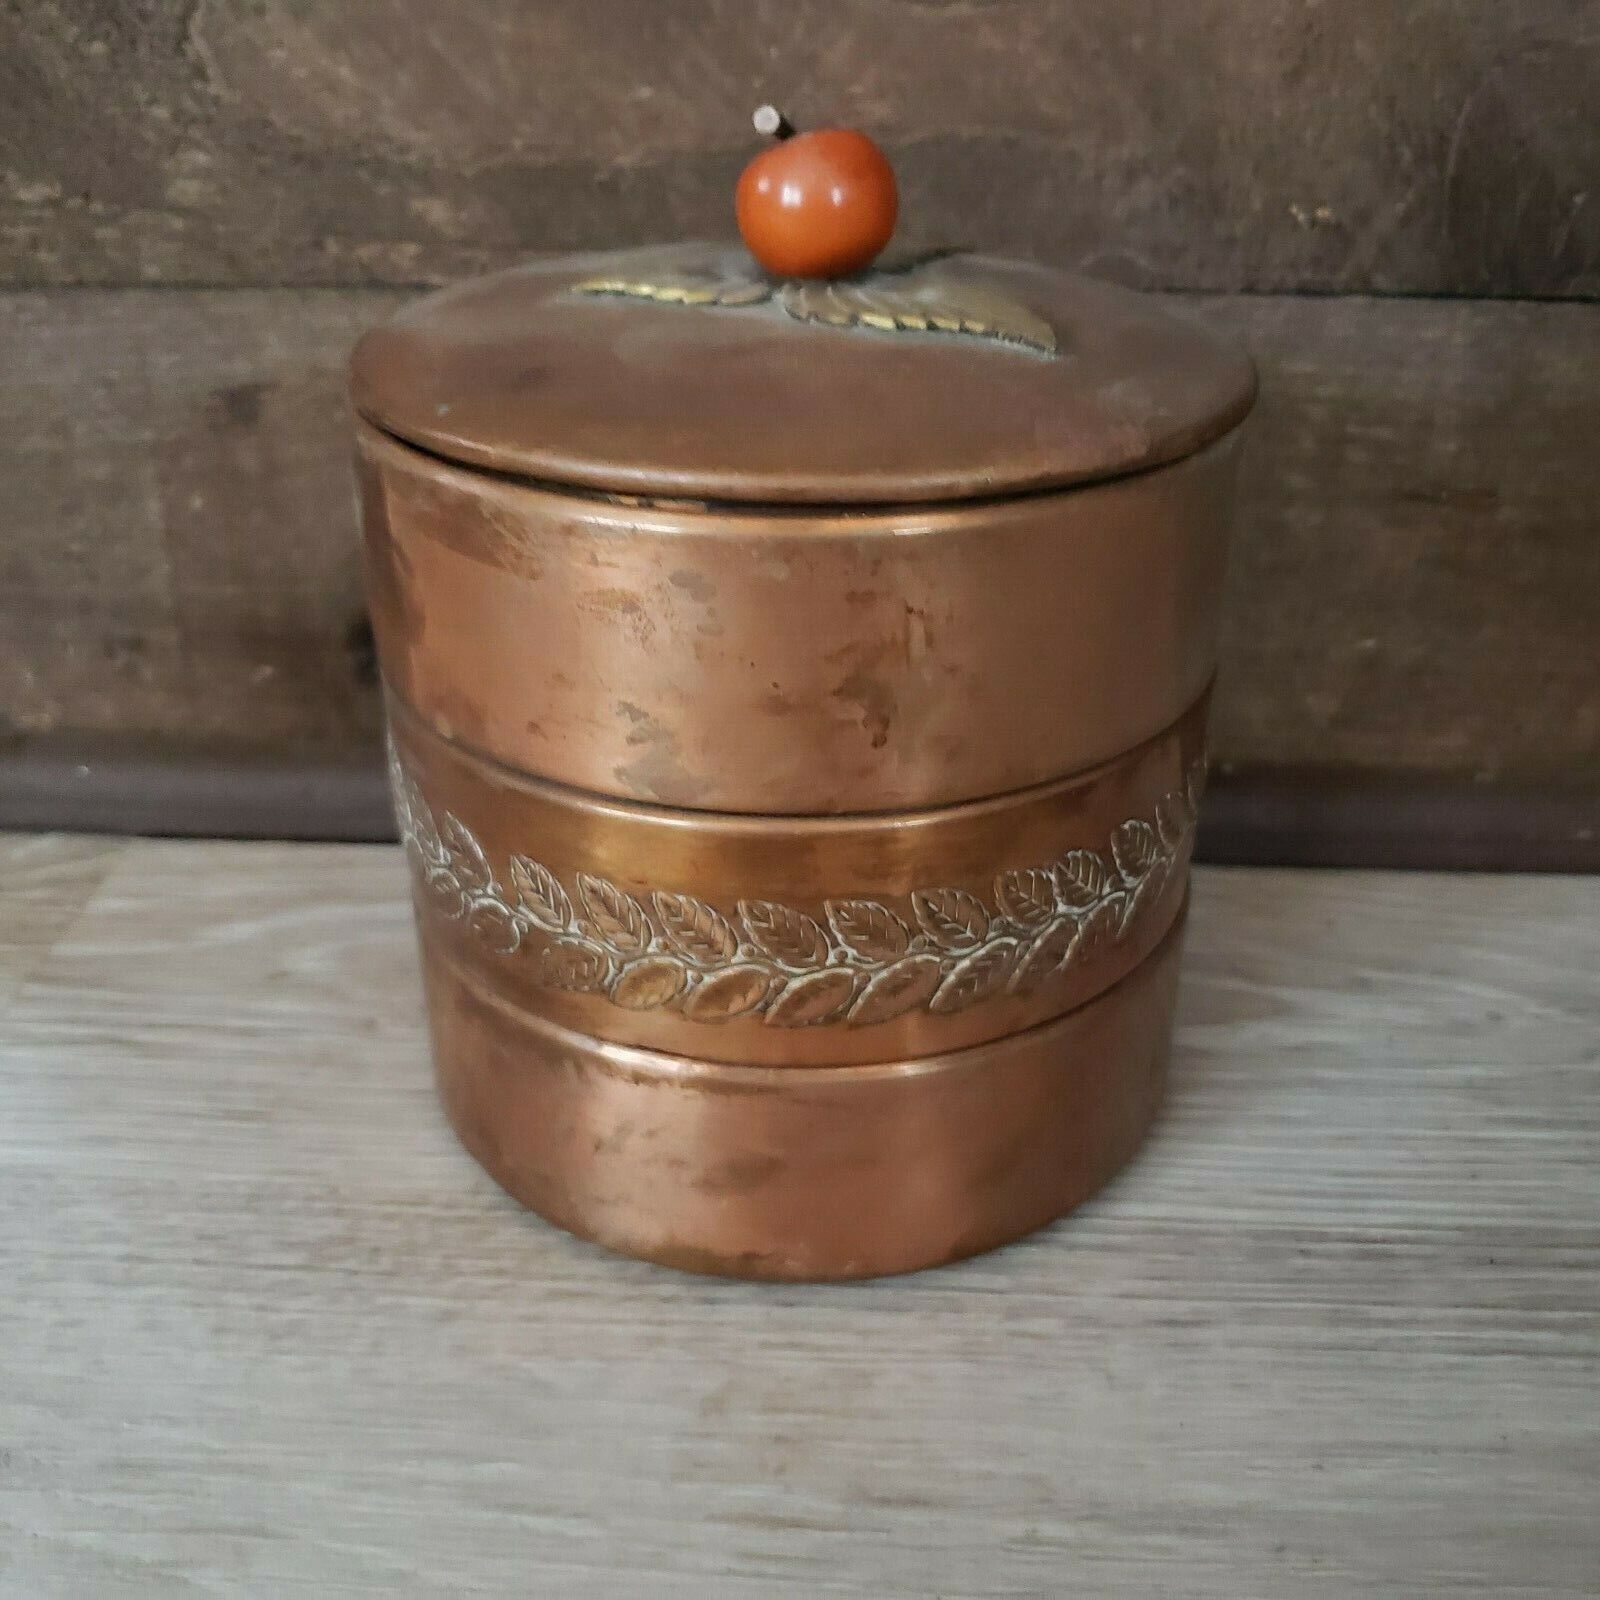 Chase Brass & Copper Company Three Layer Apple Finial Candy Box.